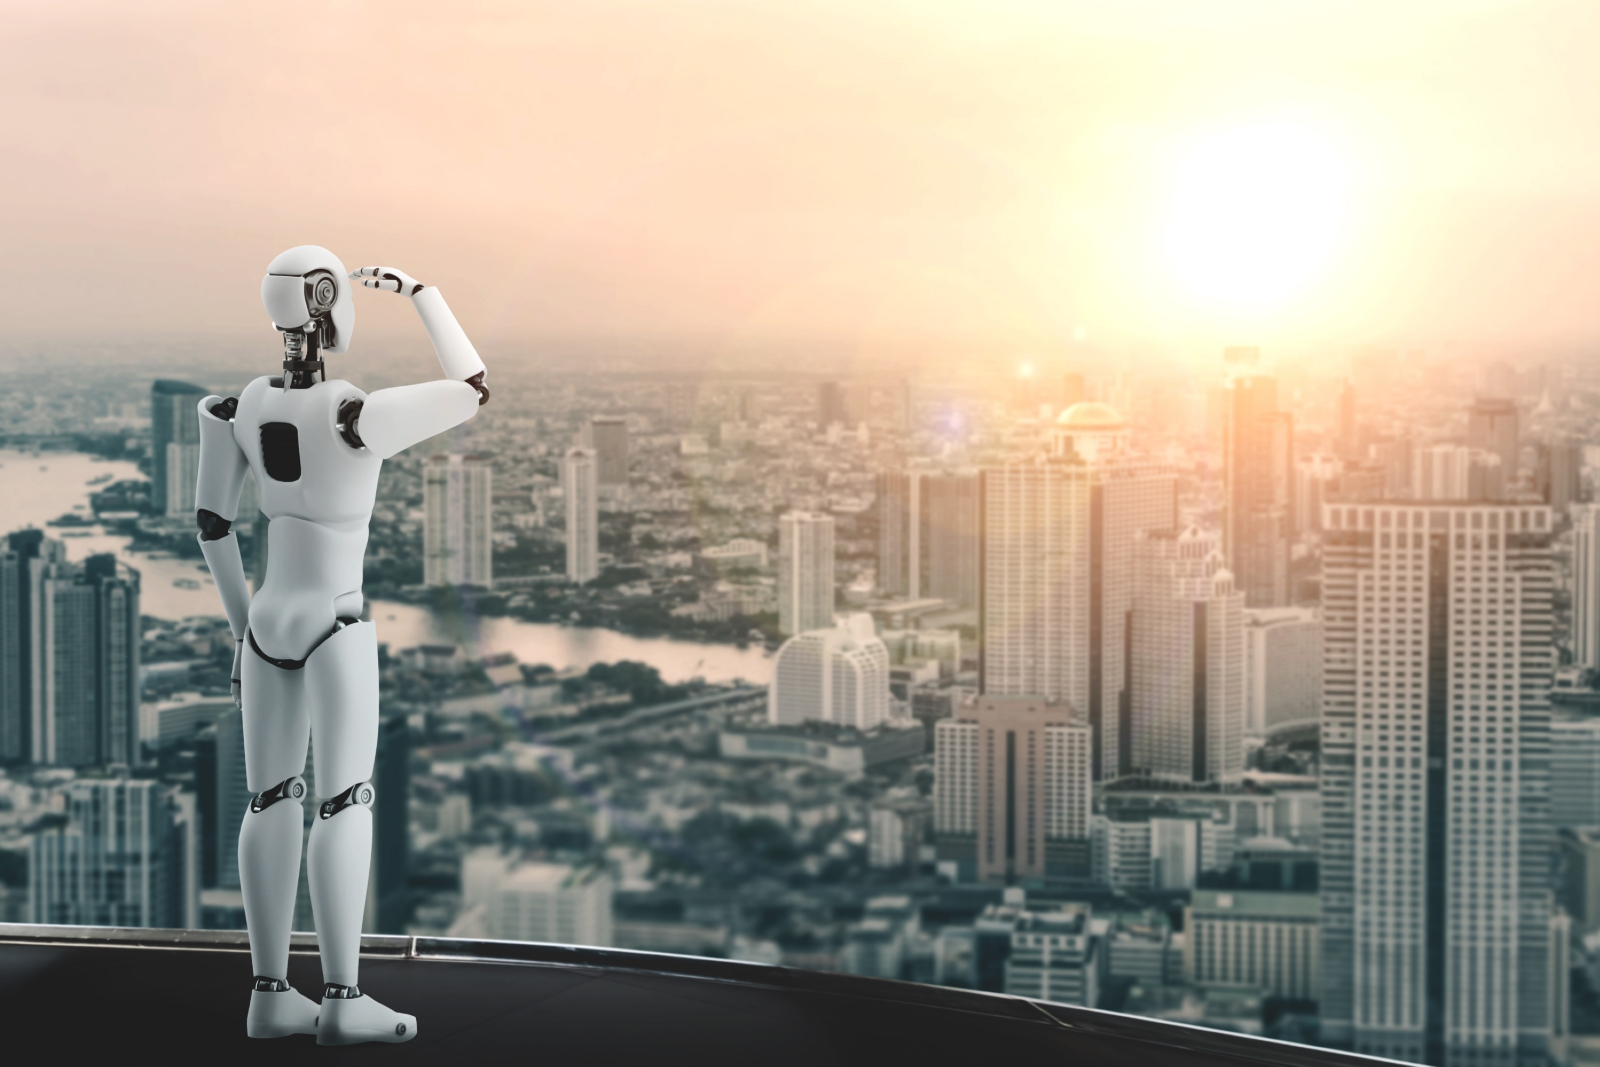 Image of a robot (humanoid-style) looking over a cityscape